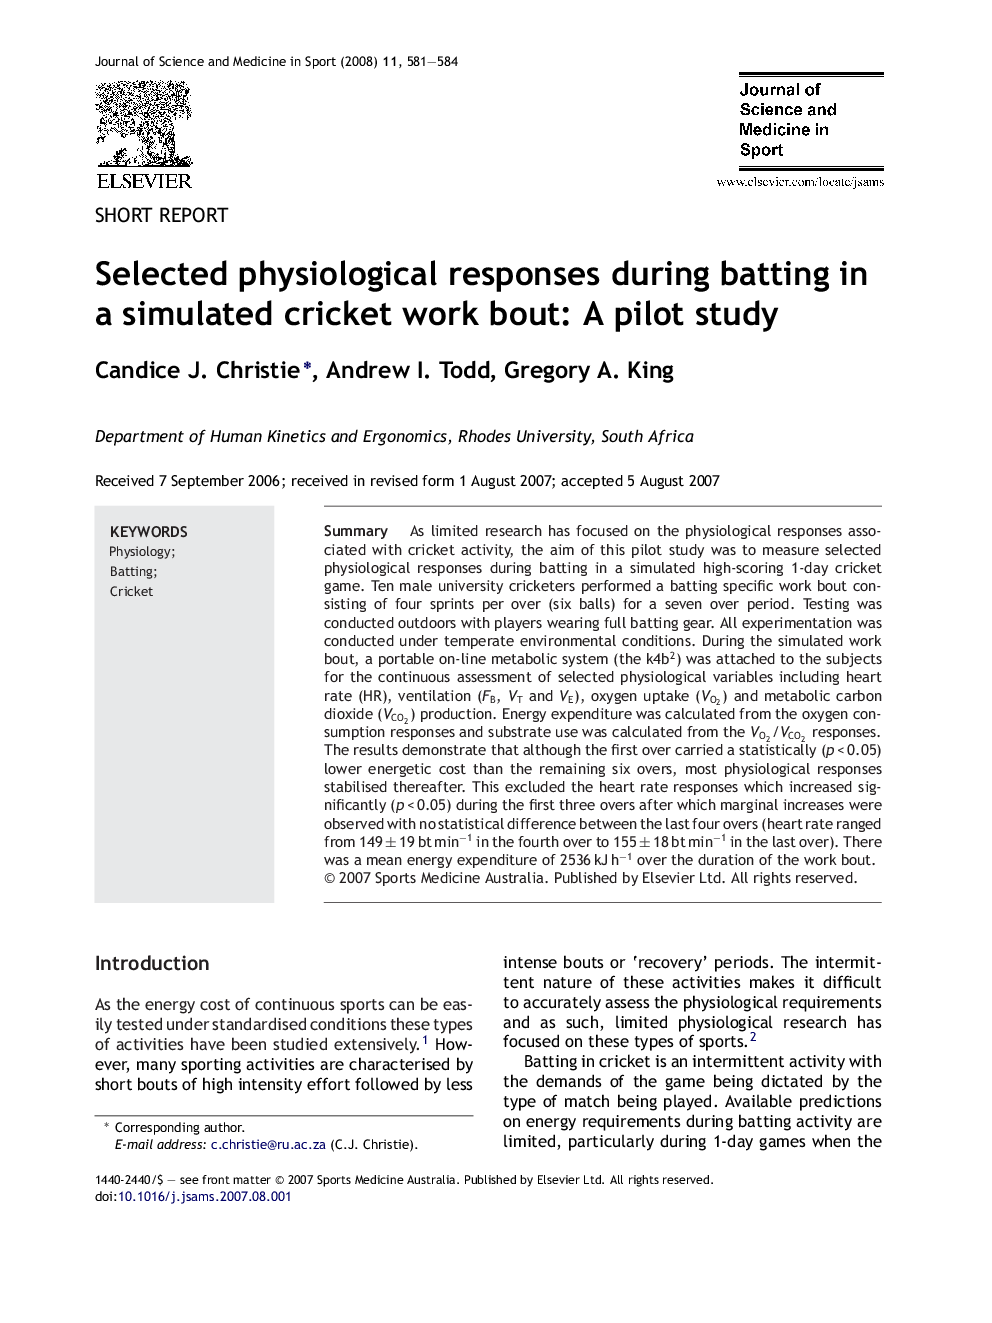 Selected physiological responses during batting in a simulated cricket work bout: A pilot study